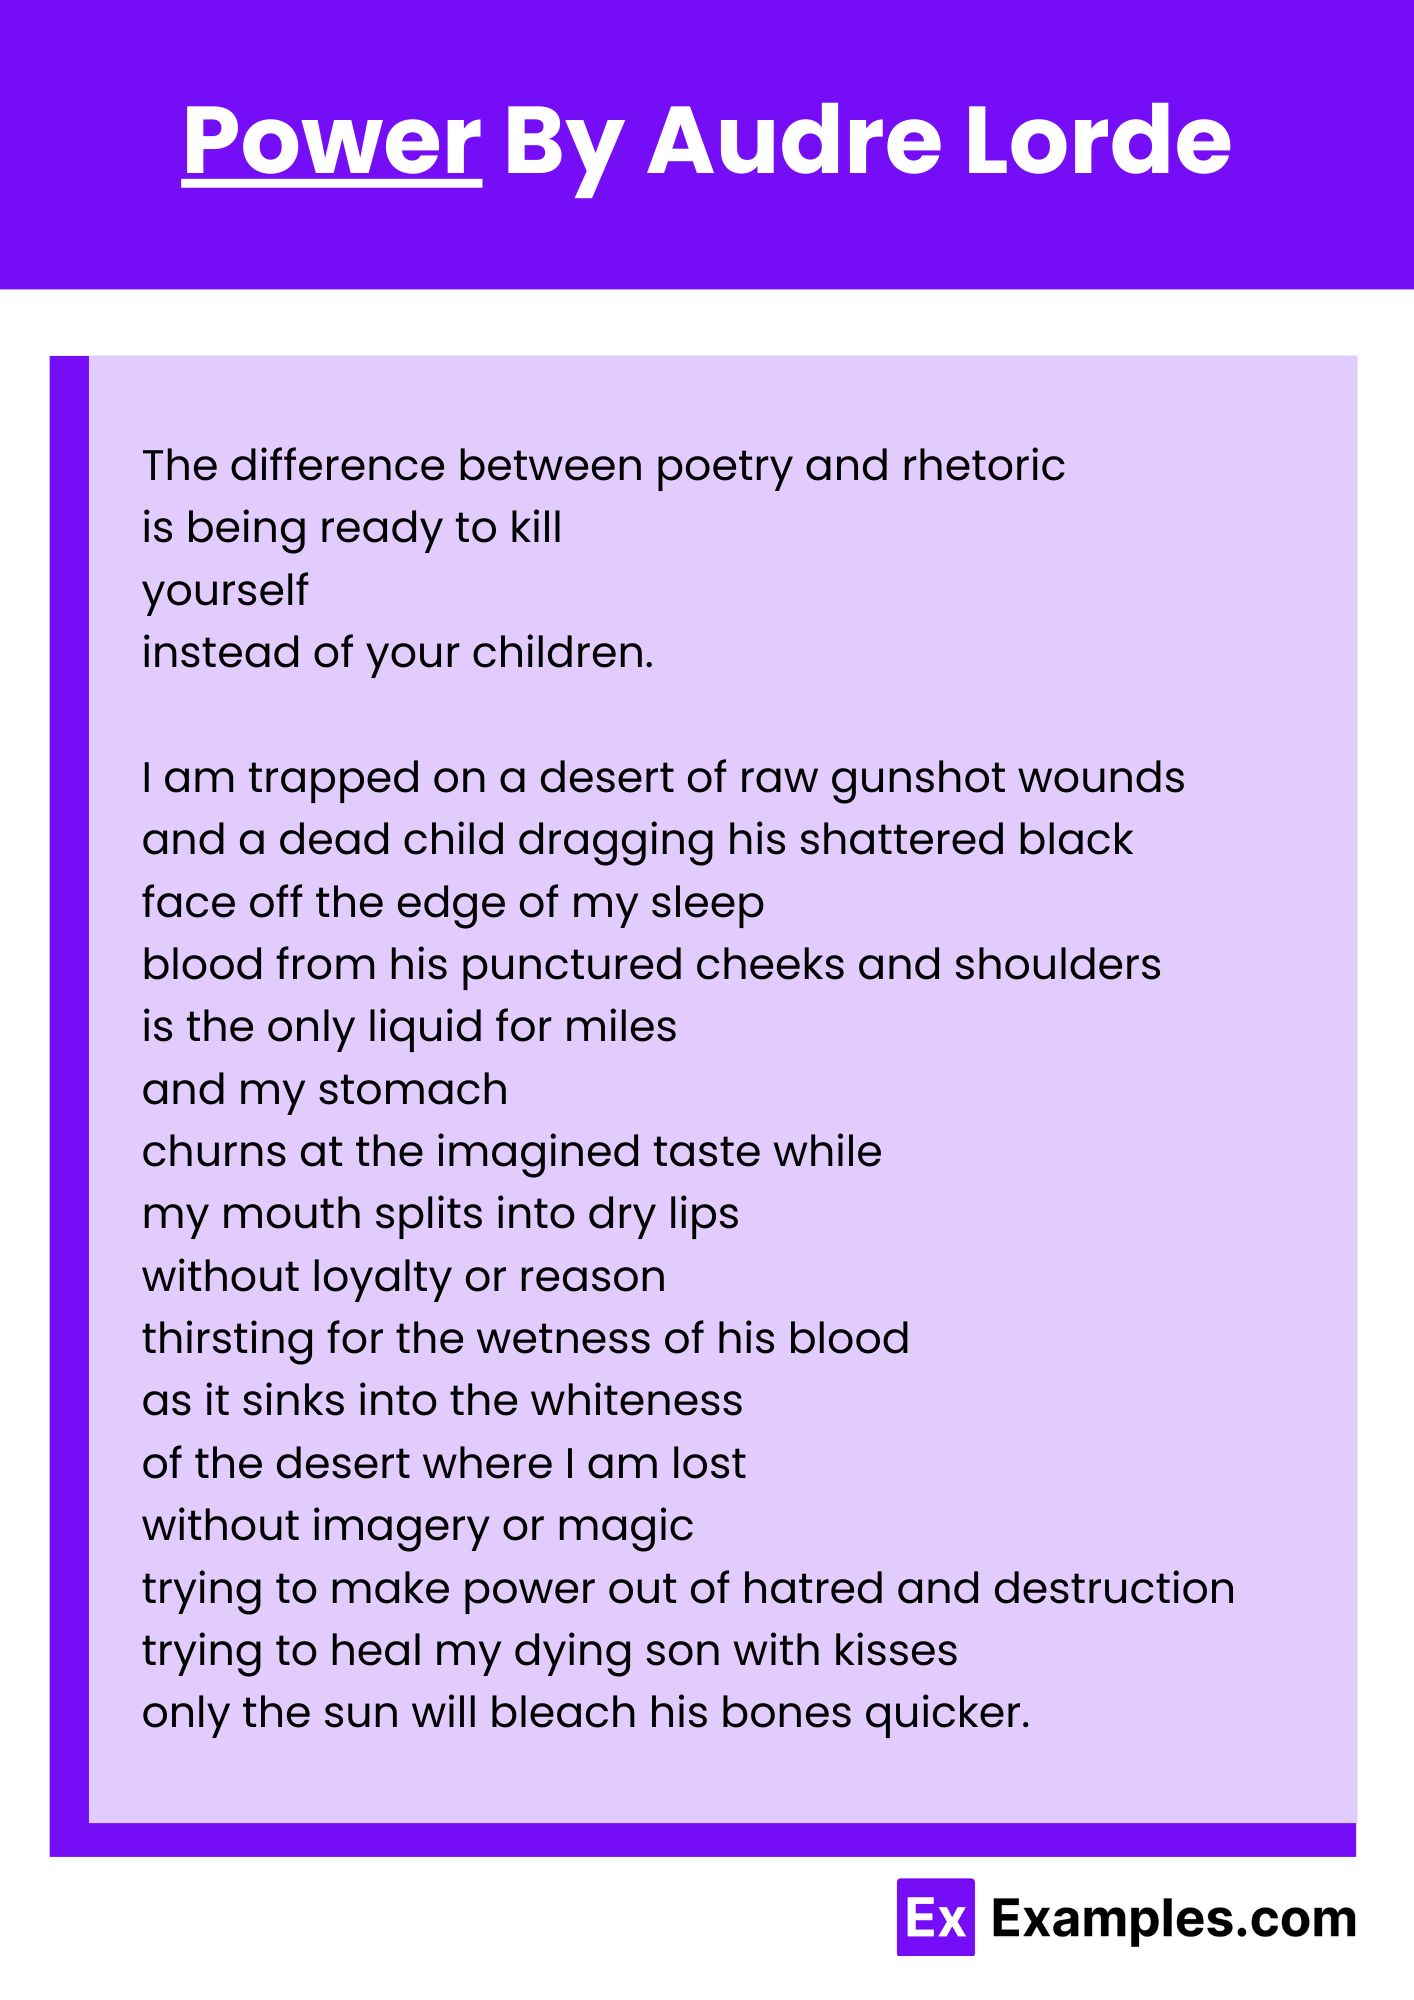 Power By Audre Lorde